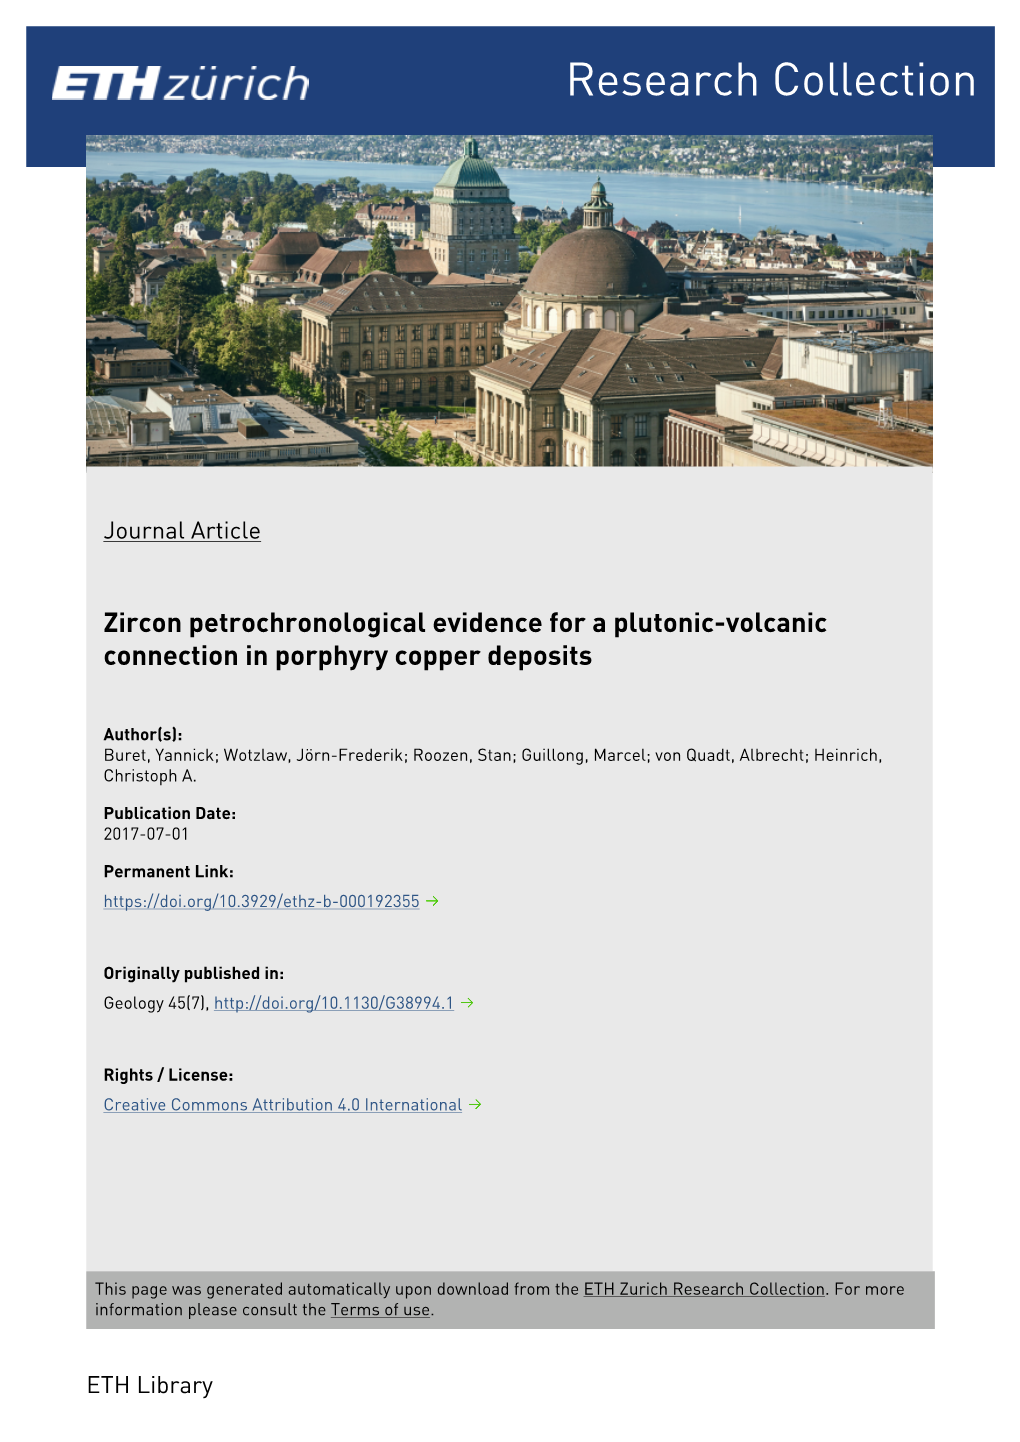 Zircon Petrochronological Evidence for a Plutonic-Volcanic Connection in Porphyry Copper Deposits